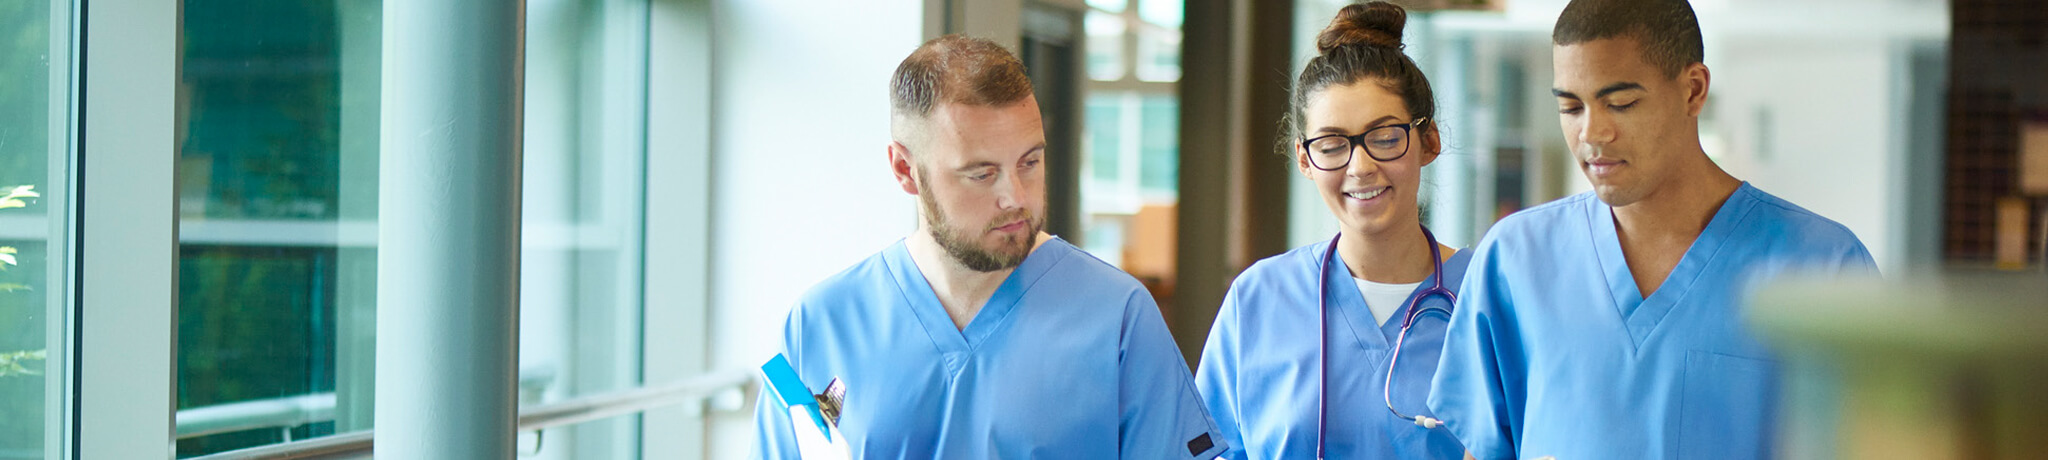 three members of medical staff walking through hospital with clipboards